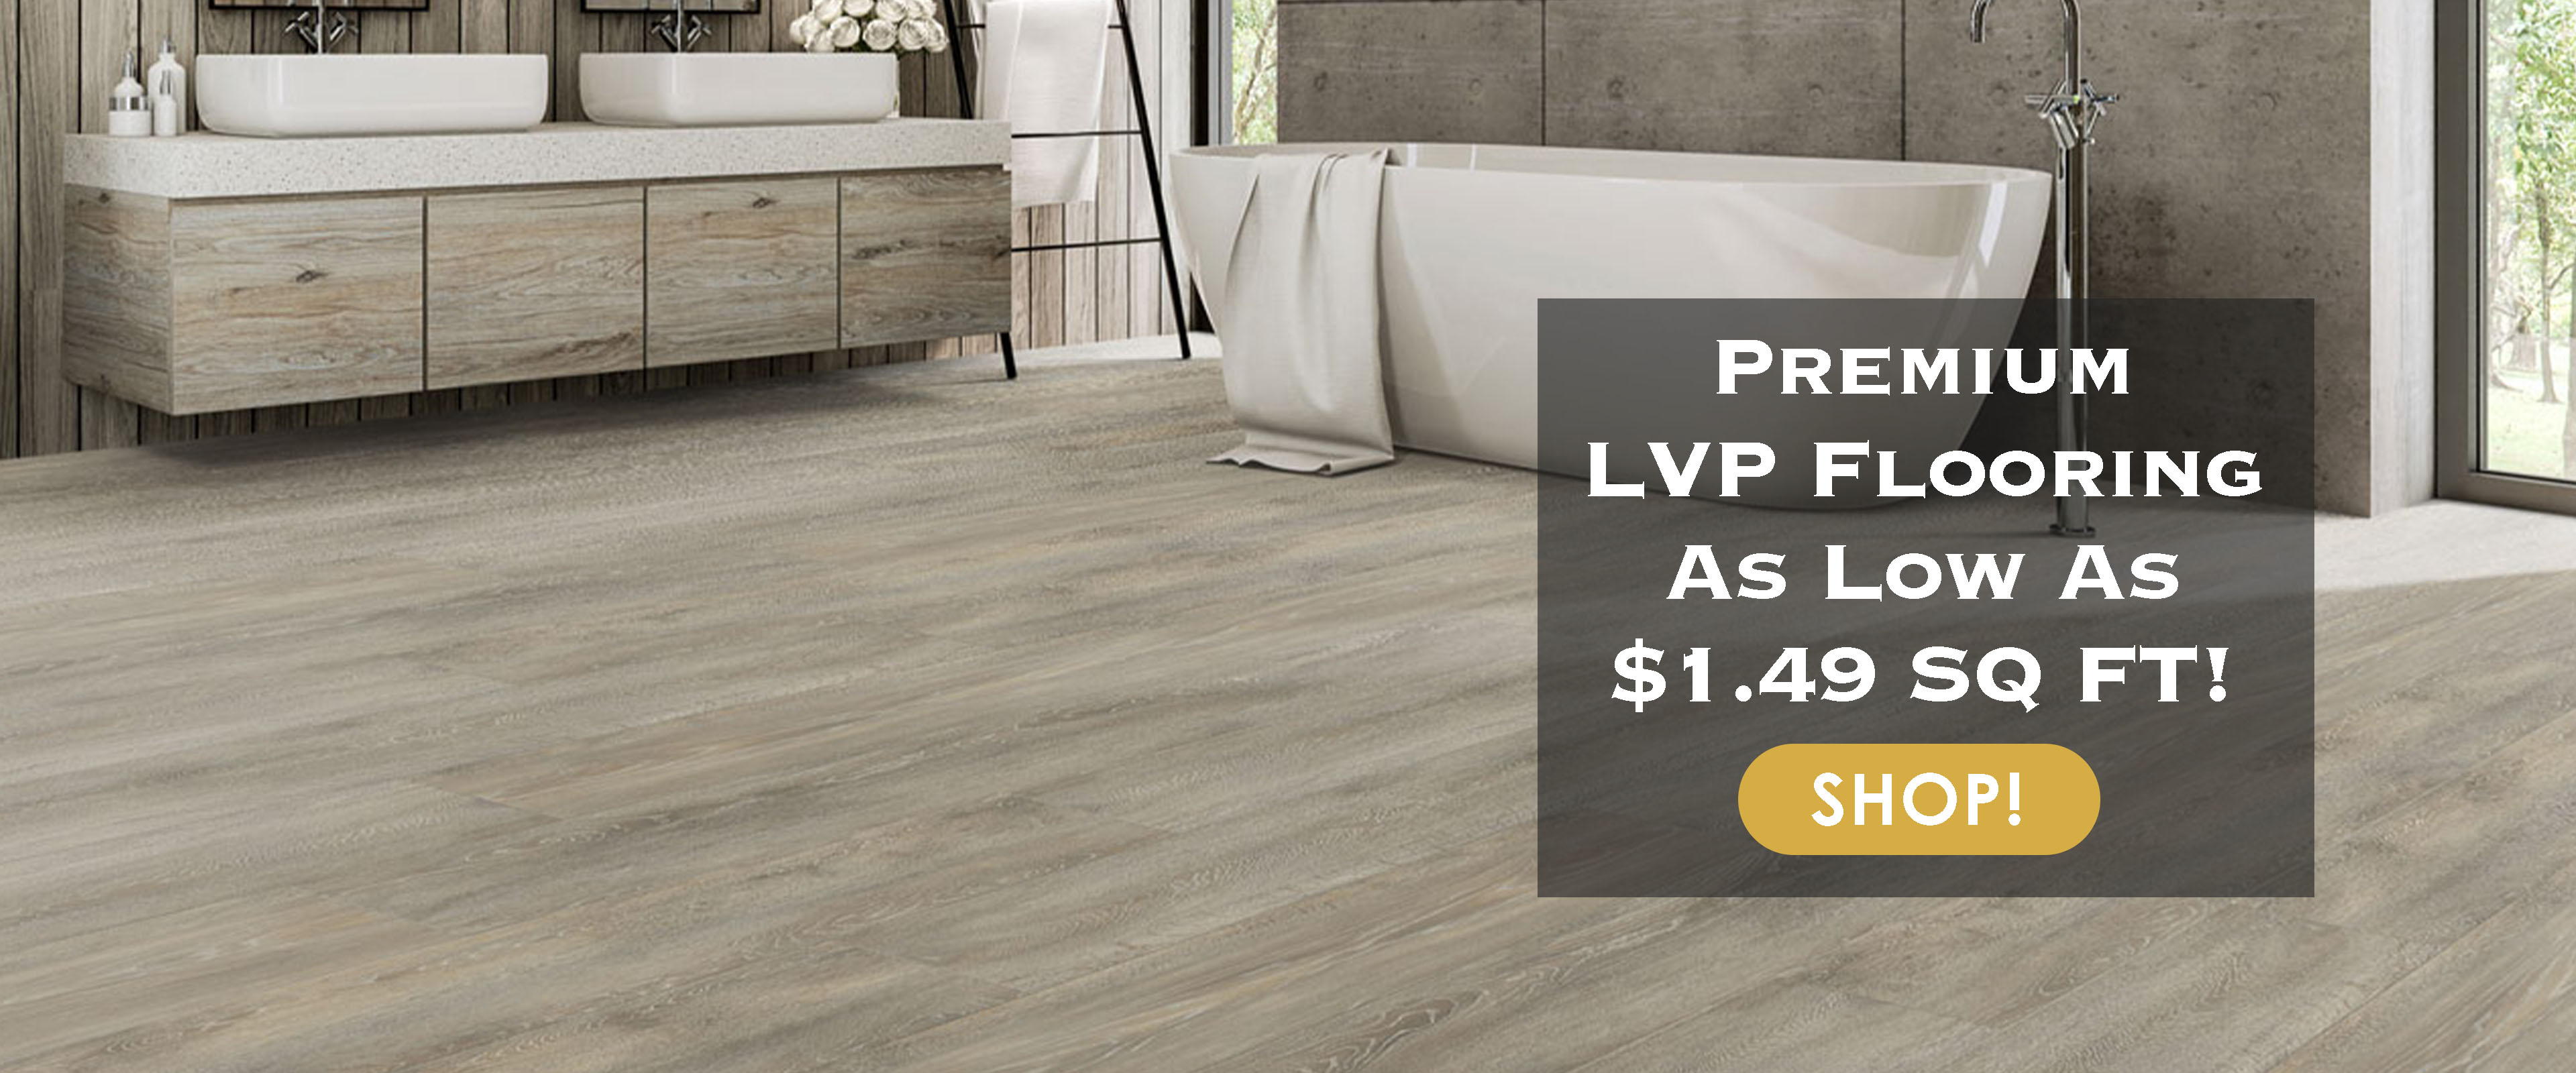 Request your free sample of Smoked Hickory flooring today!